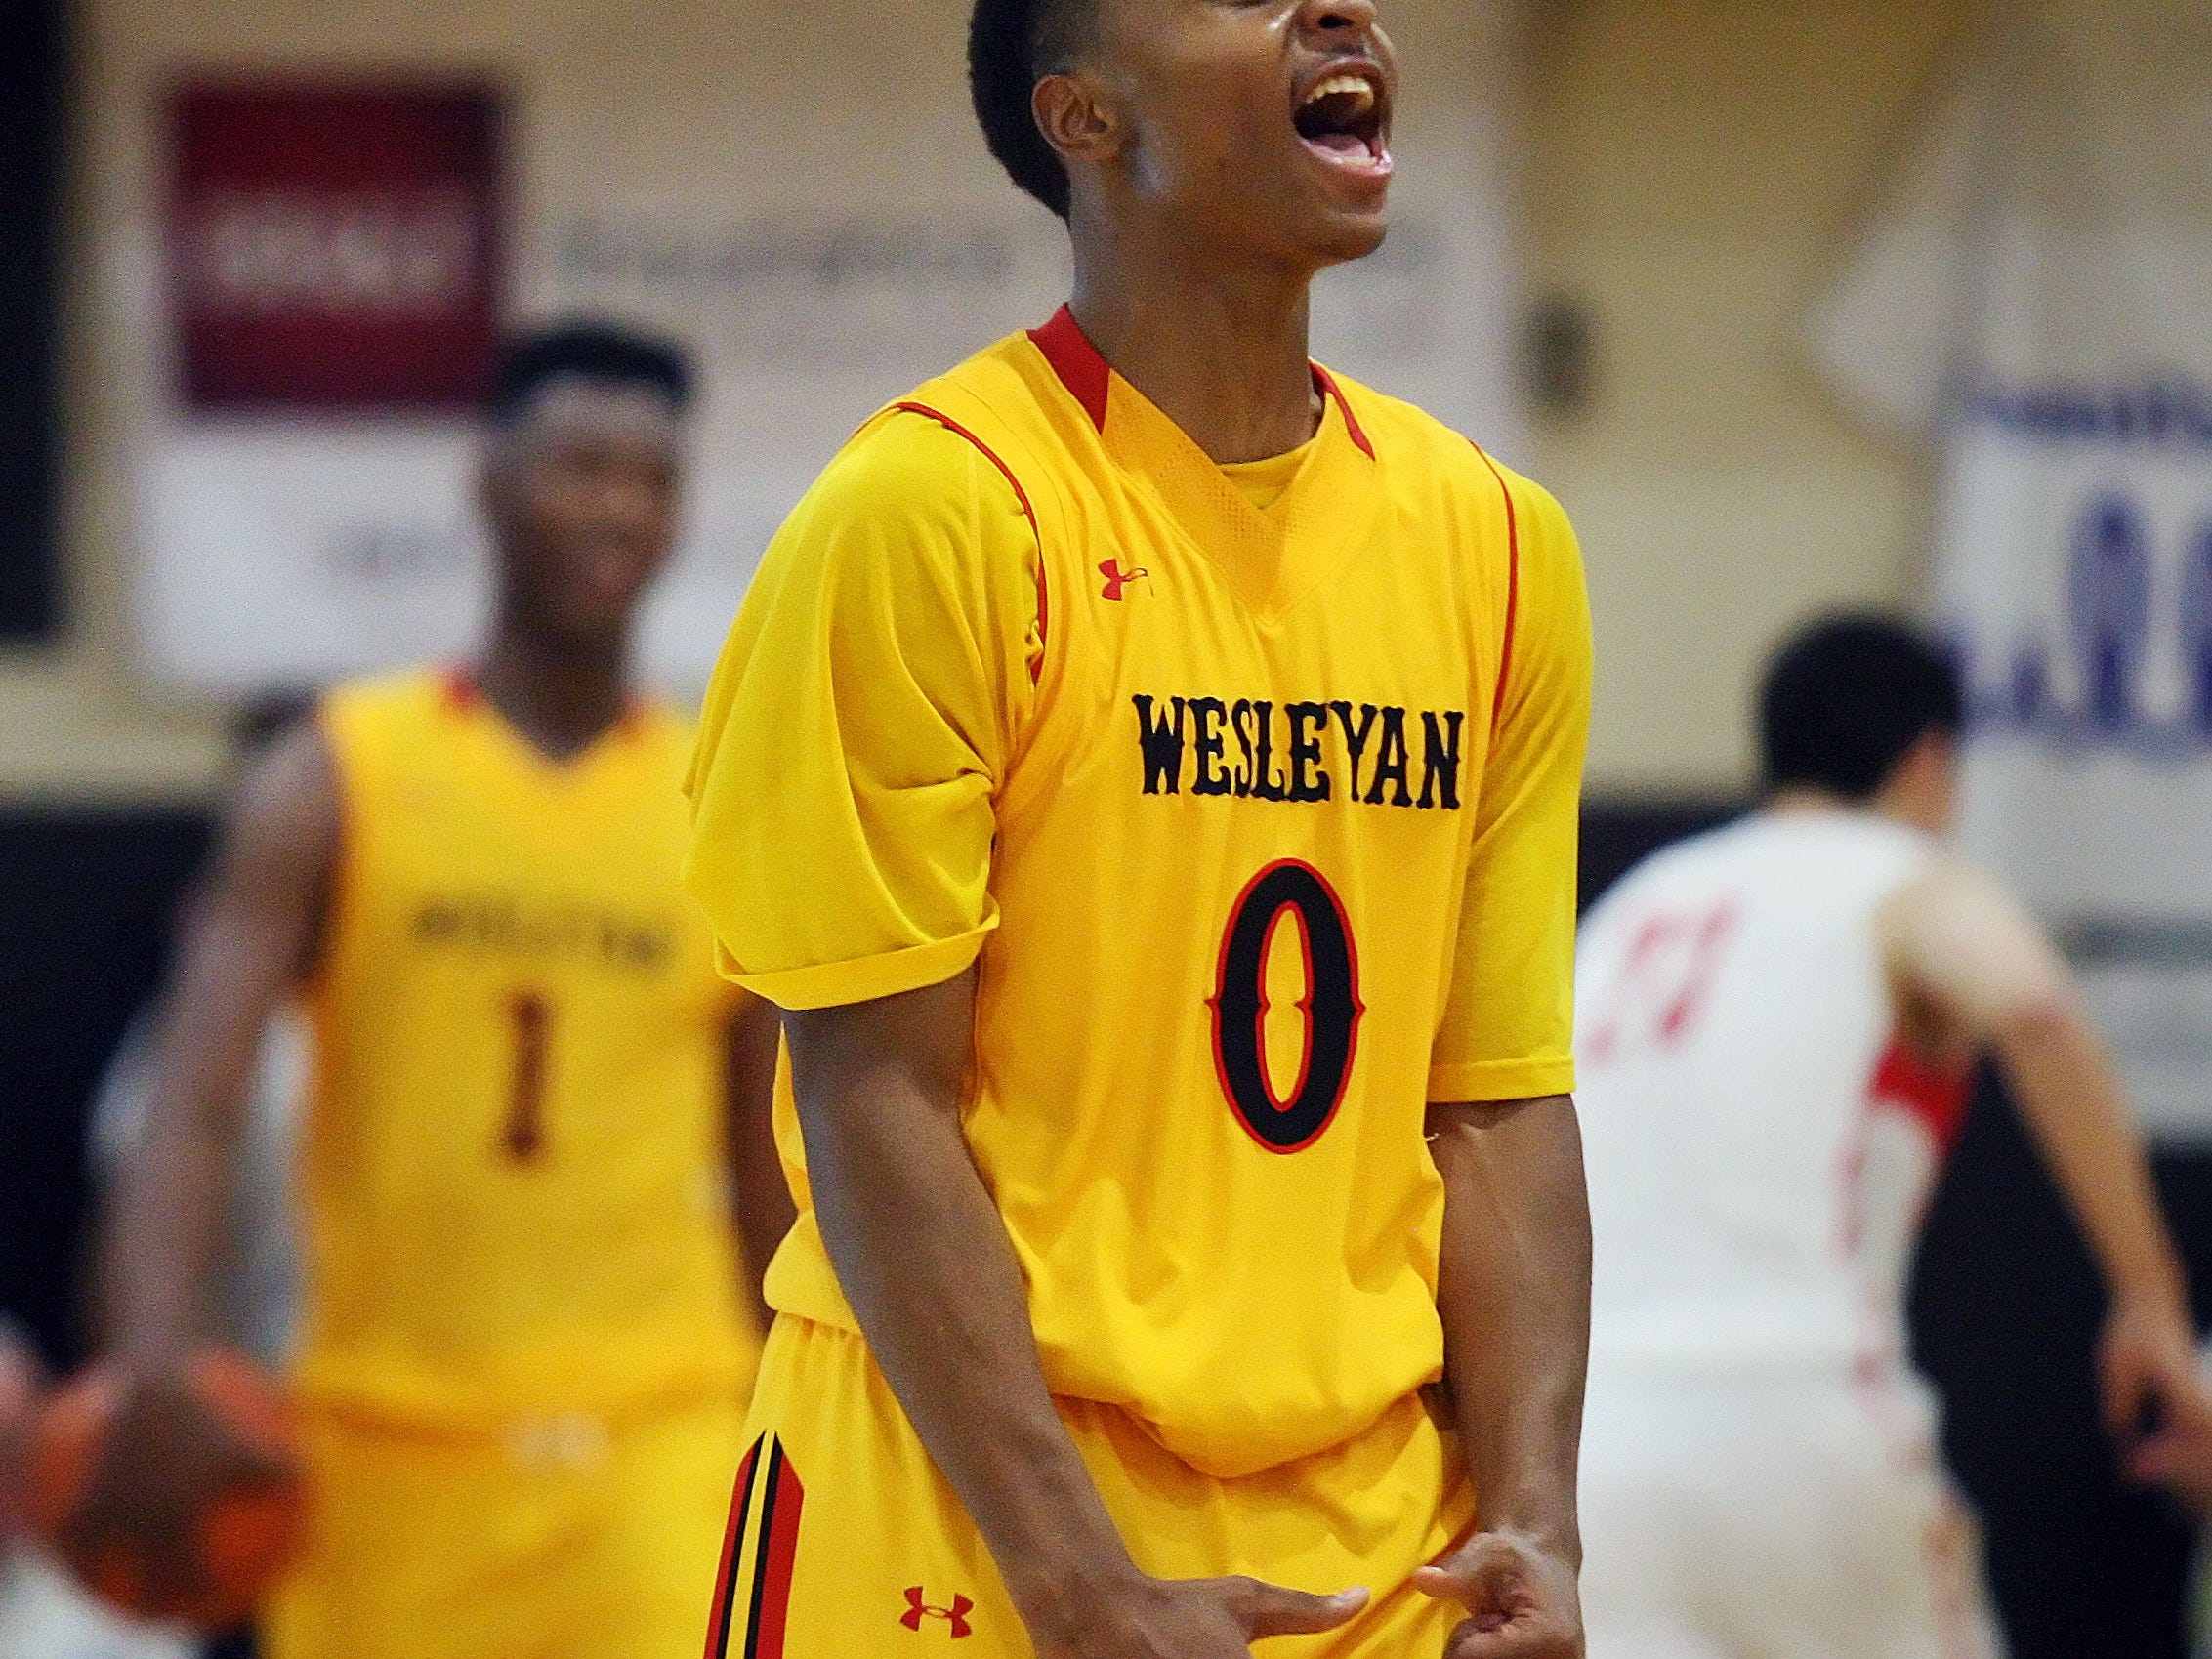 KINFAY MOROTI/THE NEWS-PRESS.. Wesleyan Christian's Bradon Childress celebrates beating Mater Dei in their quarterfinal game Saturday (12/20/14) during the 42nd Annual Culligan City of Palms Classic at Bishop Verot High School in Fort Myers. Wesleyan Christian beat Mater Dei 67-62.